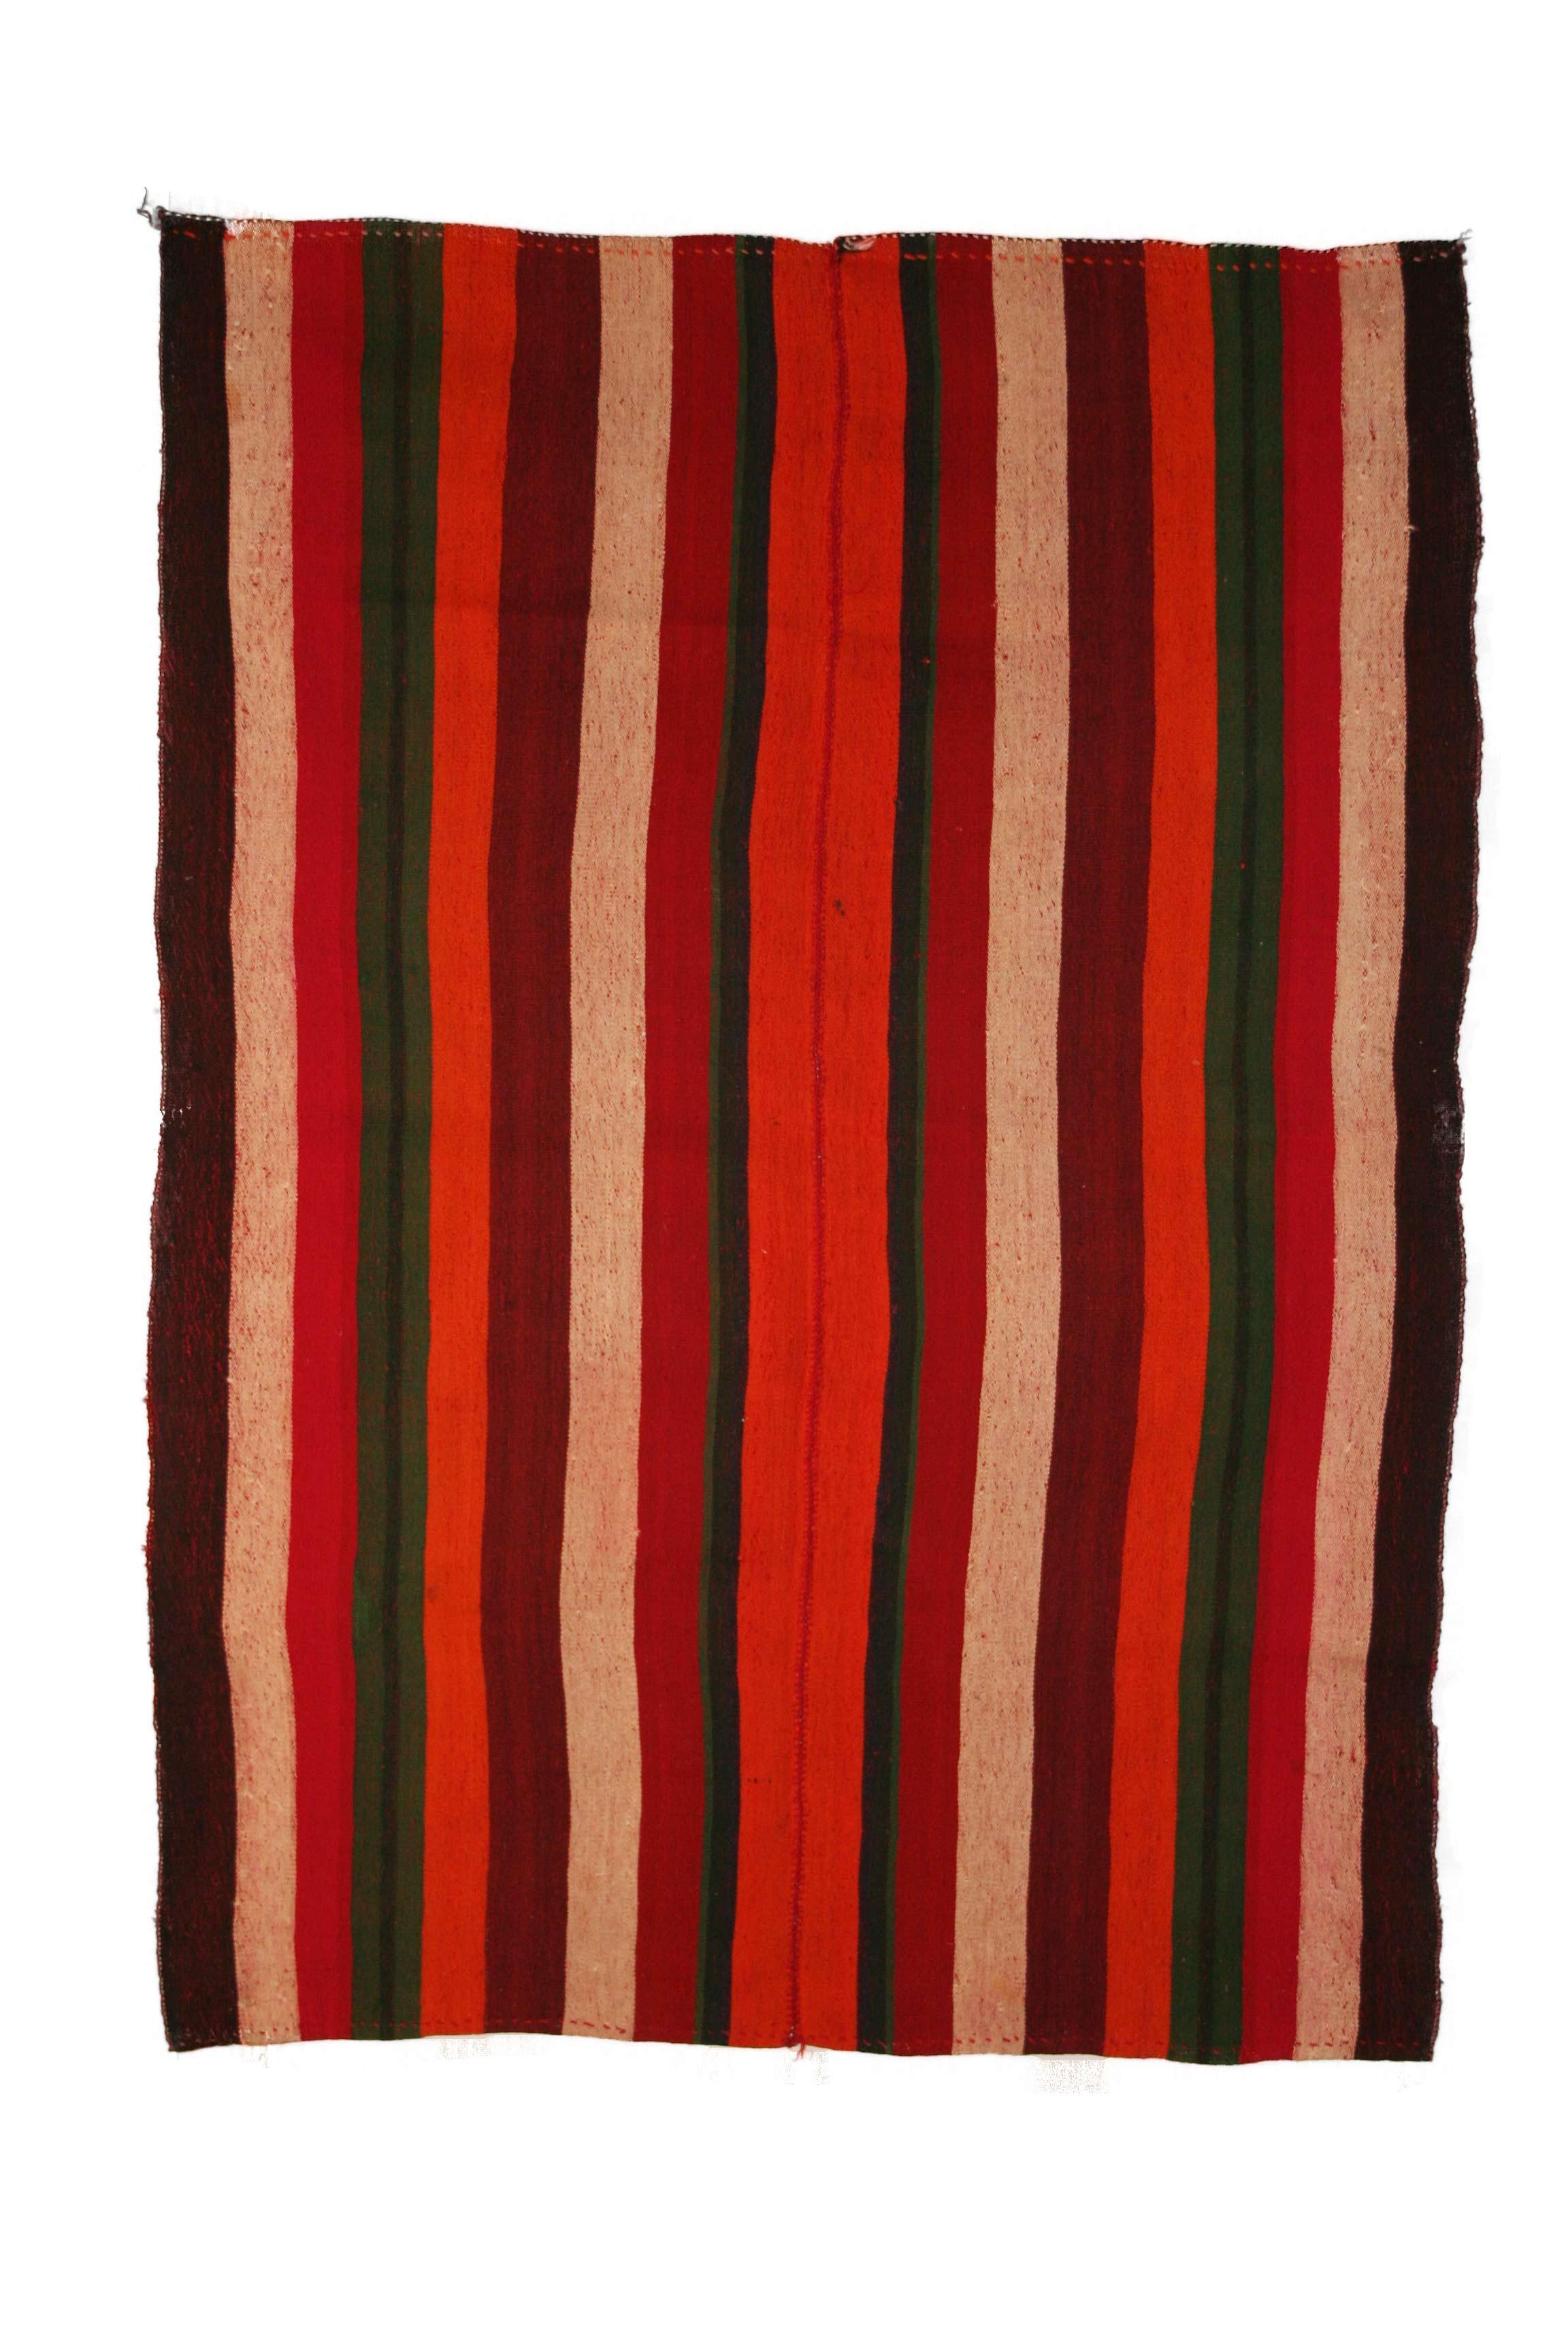 A very graphic tribal Kilim composed of two joined panels each containing an array of polychrome vertical stripes of various widths. The result is a wool flat-weave with a mirror image pattern having a central stripe that is considerably wider than